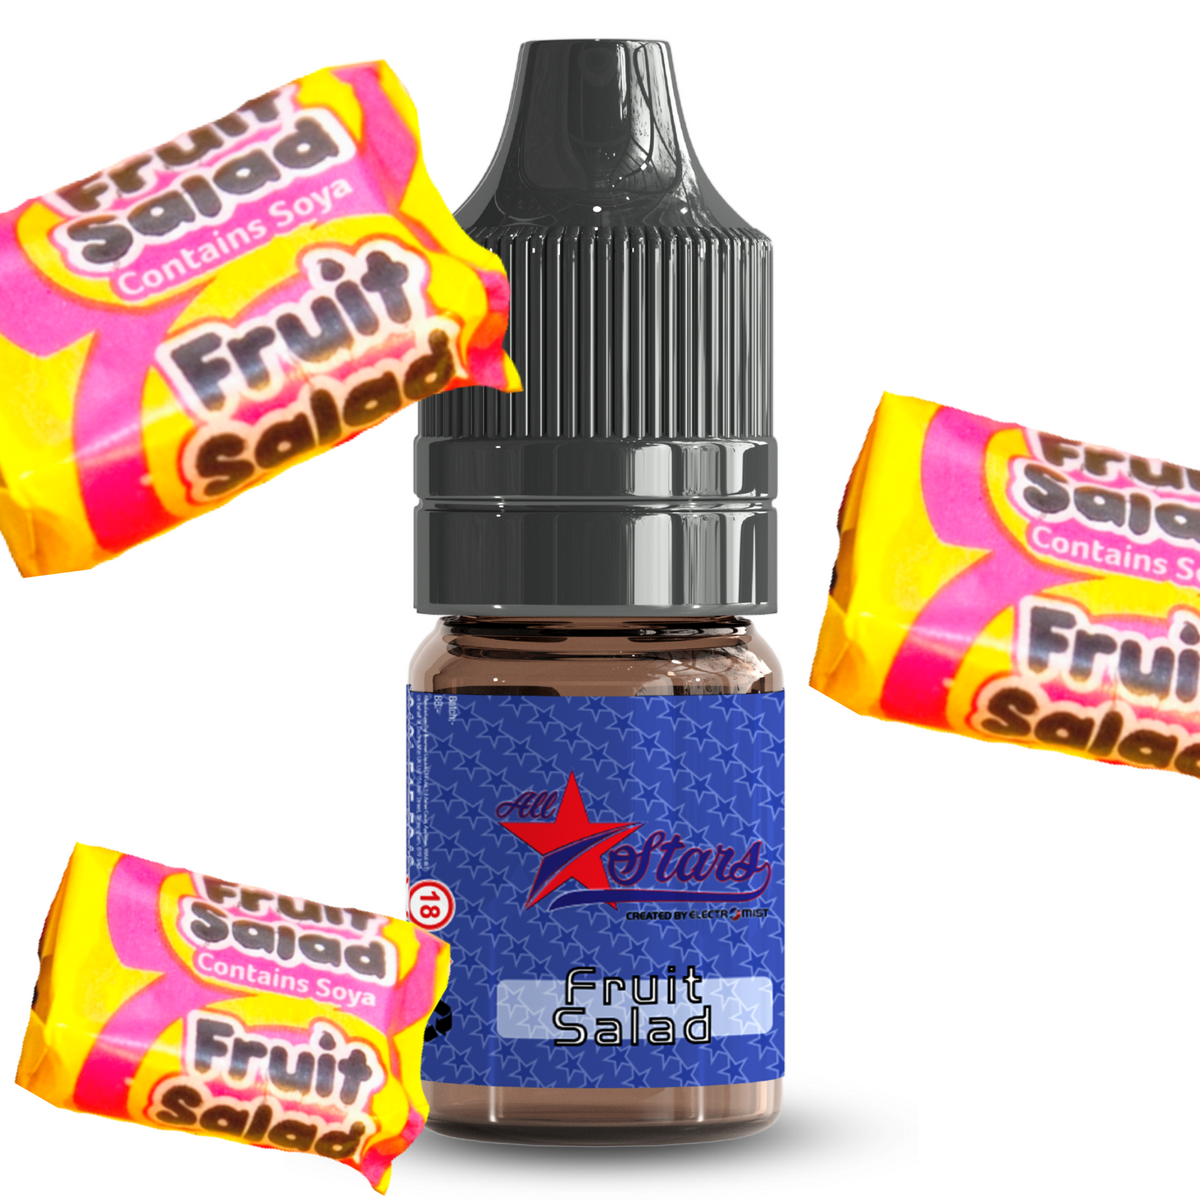 All Stars E-Liquid from the vape brand you can trust, Electromist, . Get your taste buds ready for a flavour sensation, Fruit Salad. Nicotine Content: 6mg/12mg/18mg Products may contain nicotine. For over 18s Only ejuice, vape pen, eliquid, e cigarette, 10ml, vaping, cloud, PG, VG, 60/40, vape liquid, Flavour, TPD